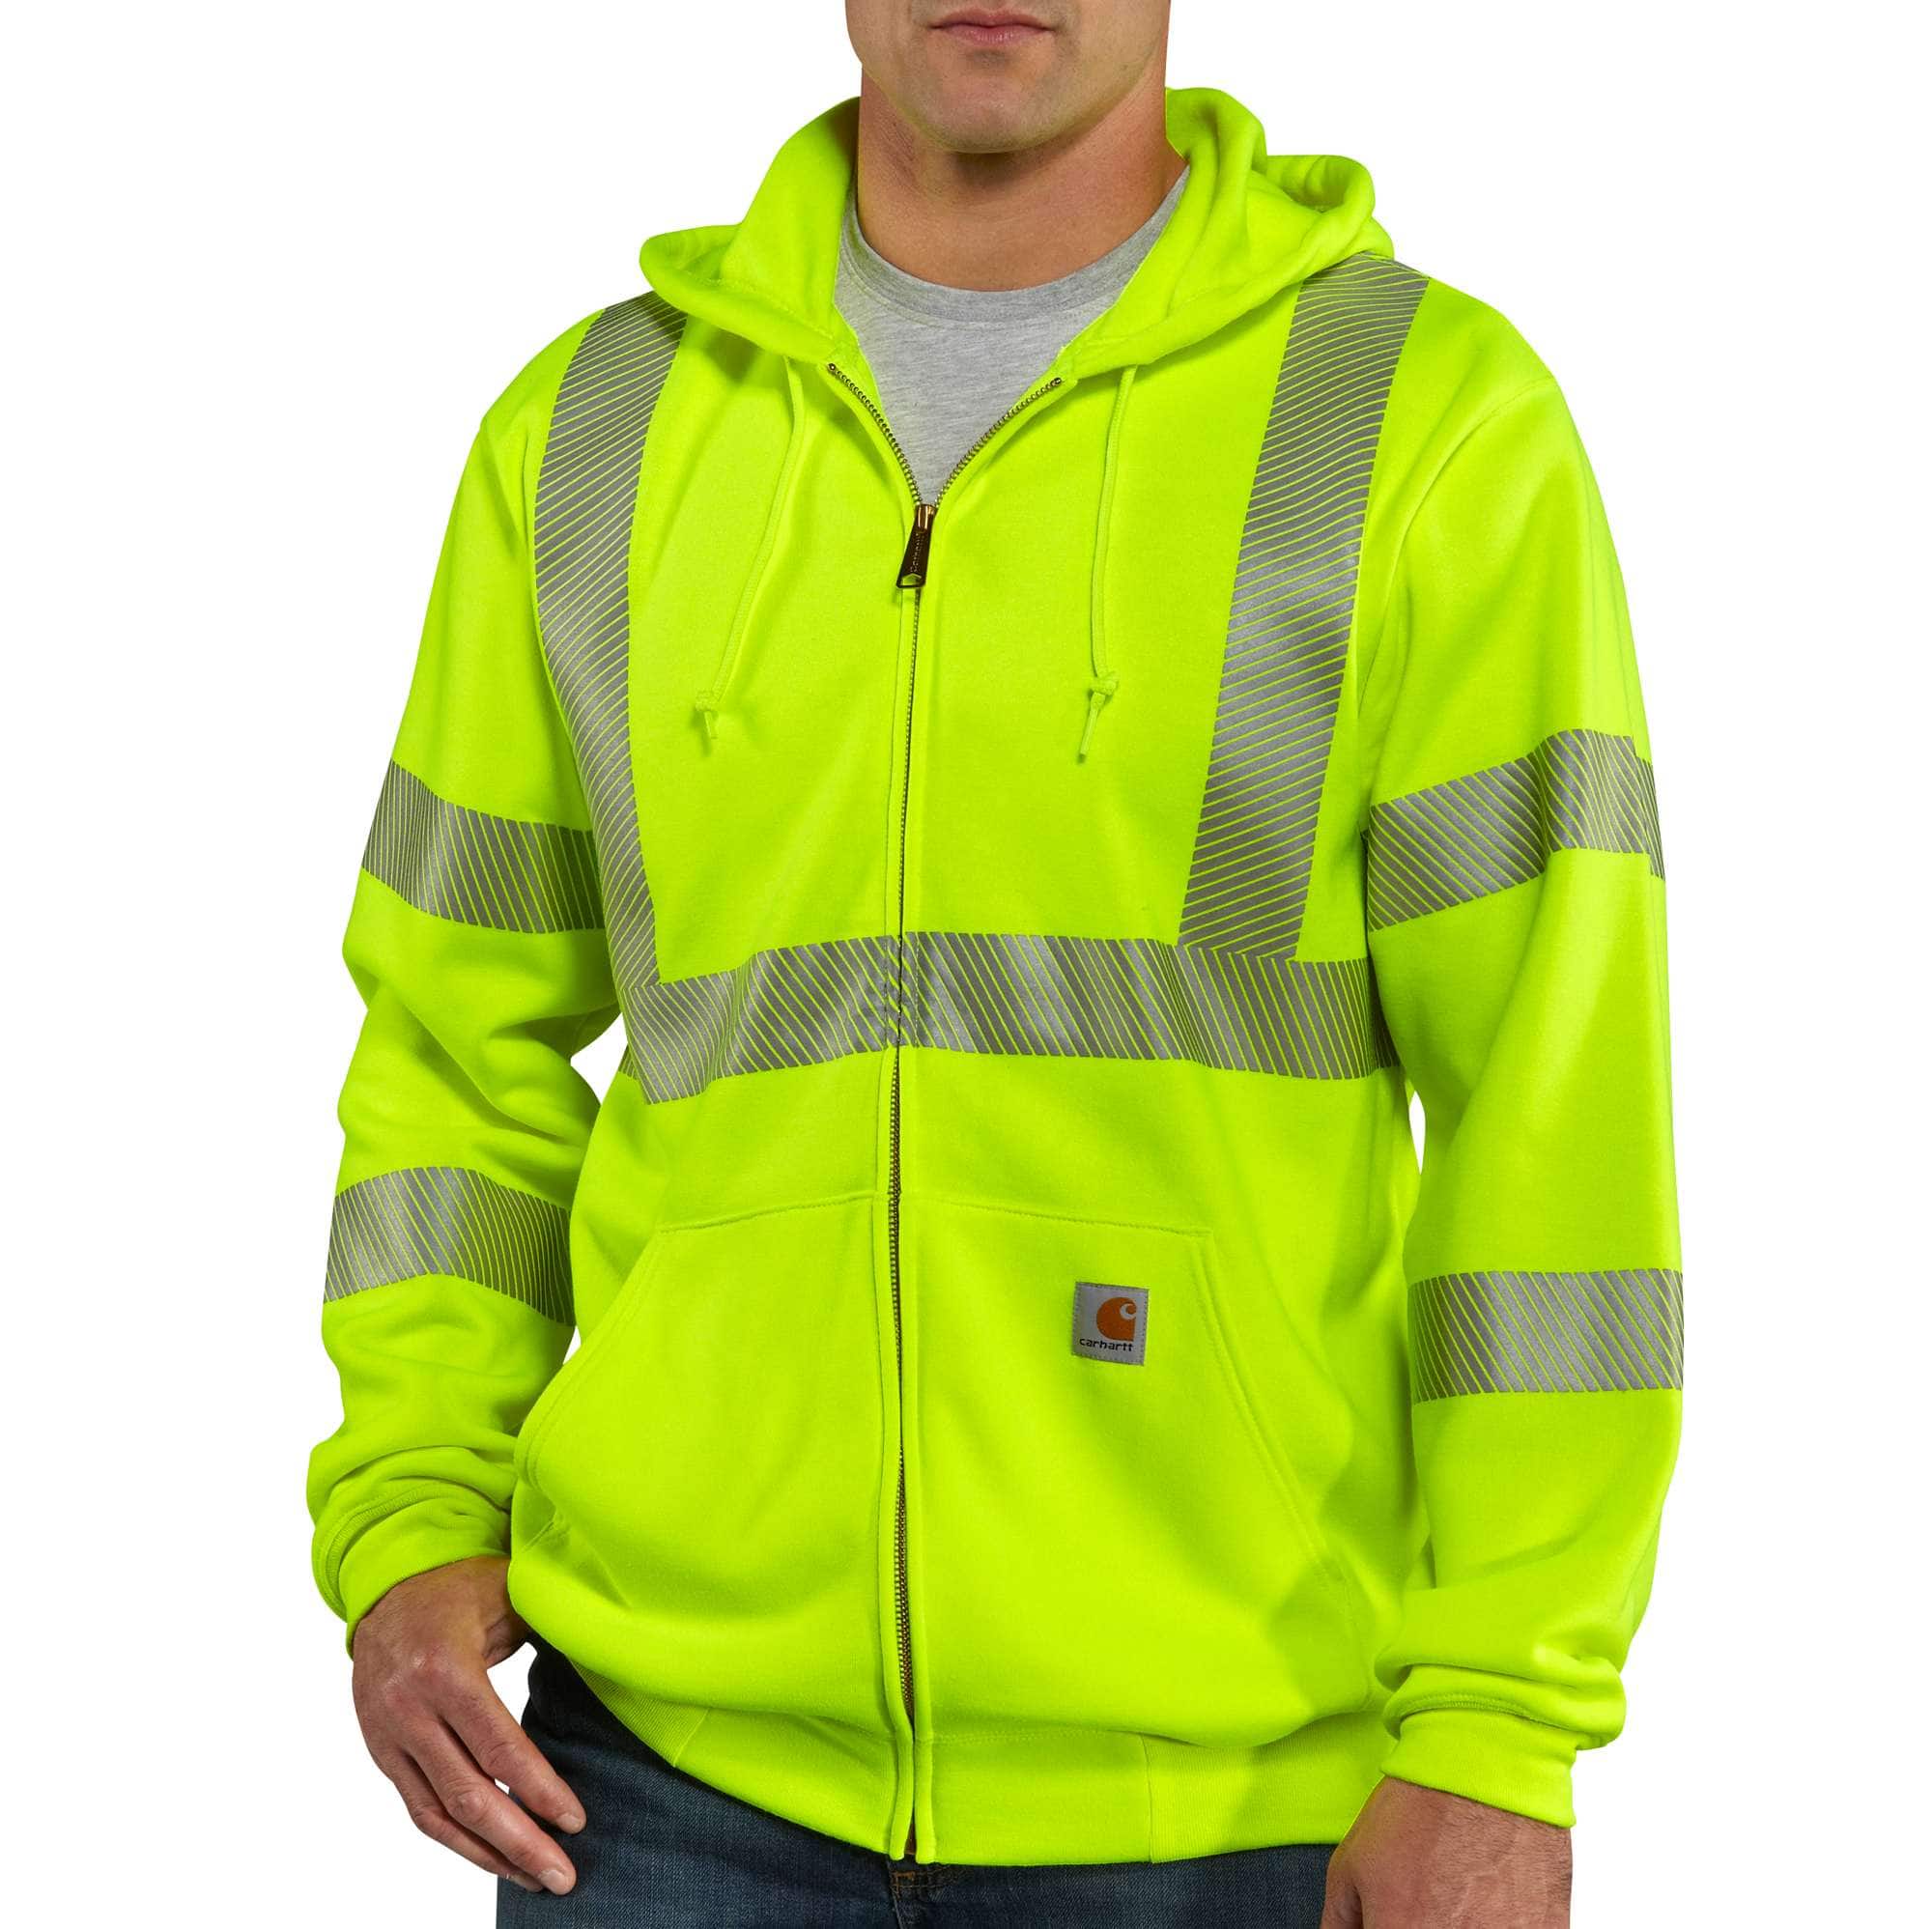 carhartt high visibility thermal lined sweatshirt